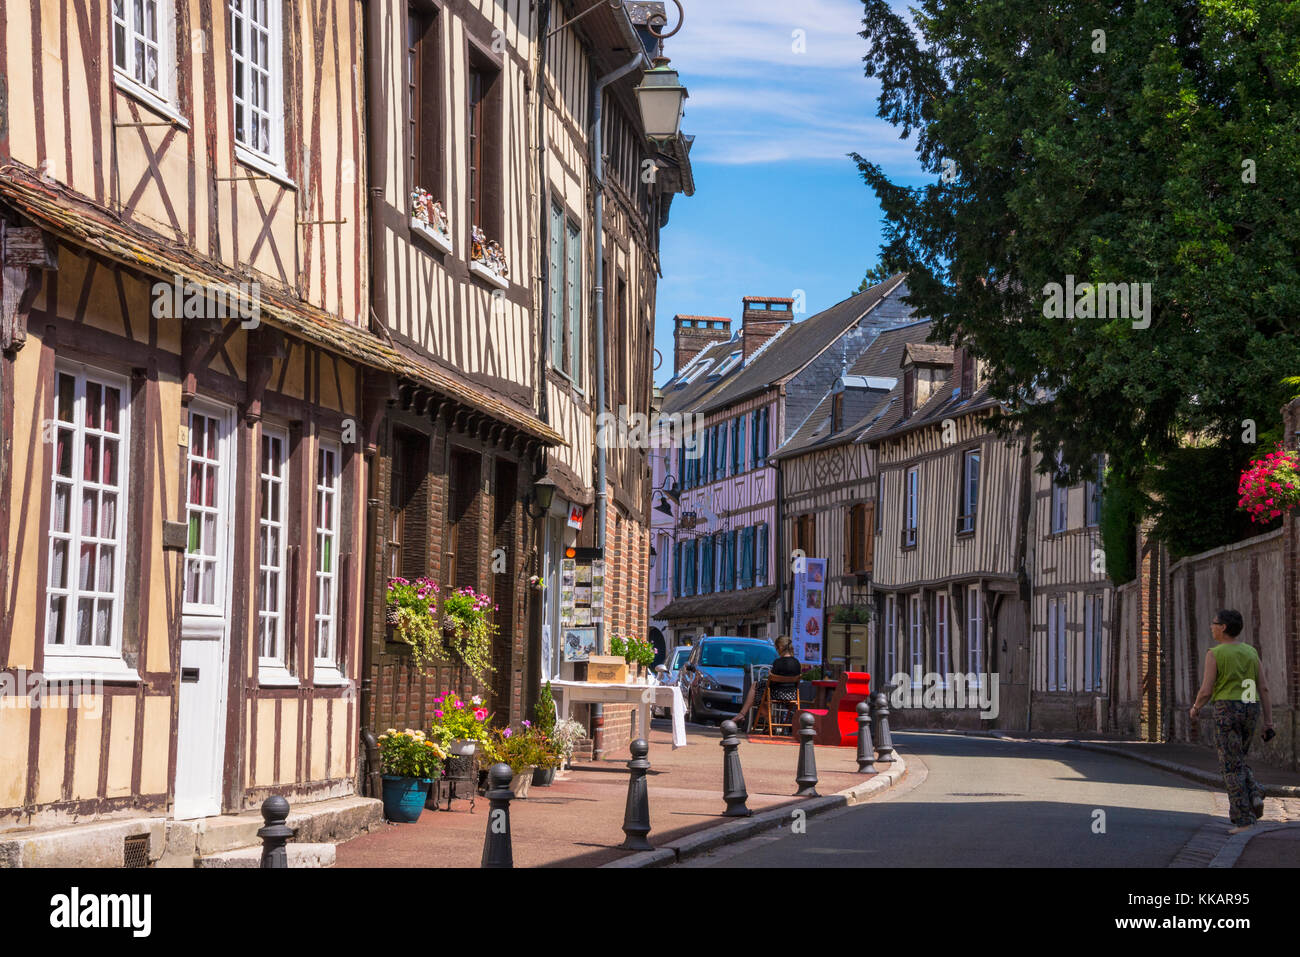 Typical half timbered houses in old town, Lyons la Foret, Eure, Normandy, France, Europe Stock Photo